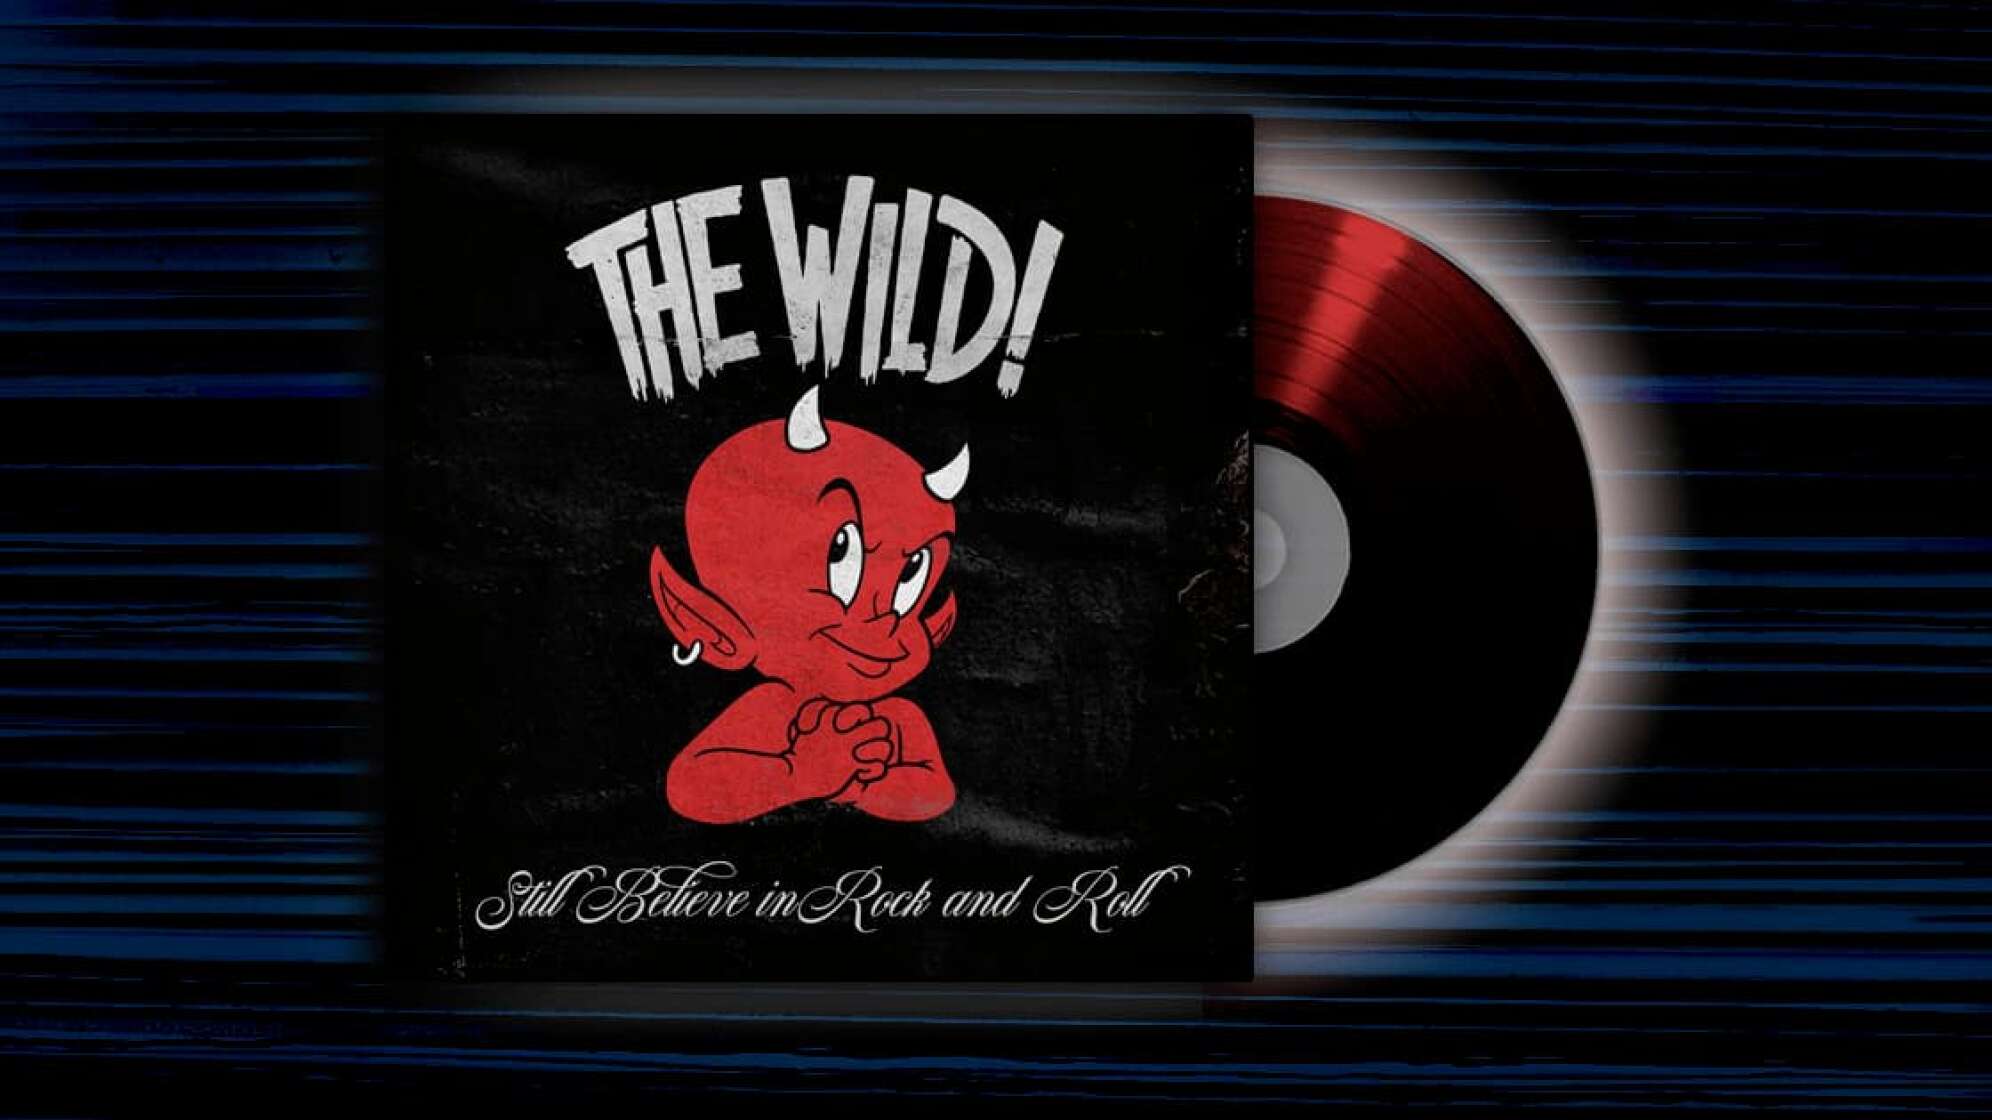 Album-Cover: The Wild! - Still Believe In Rock And Roll